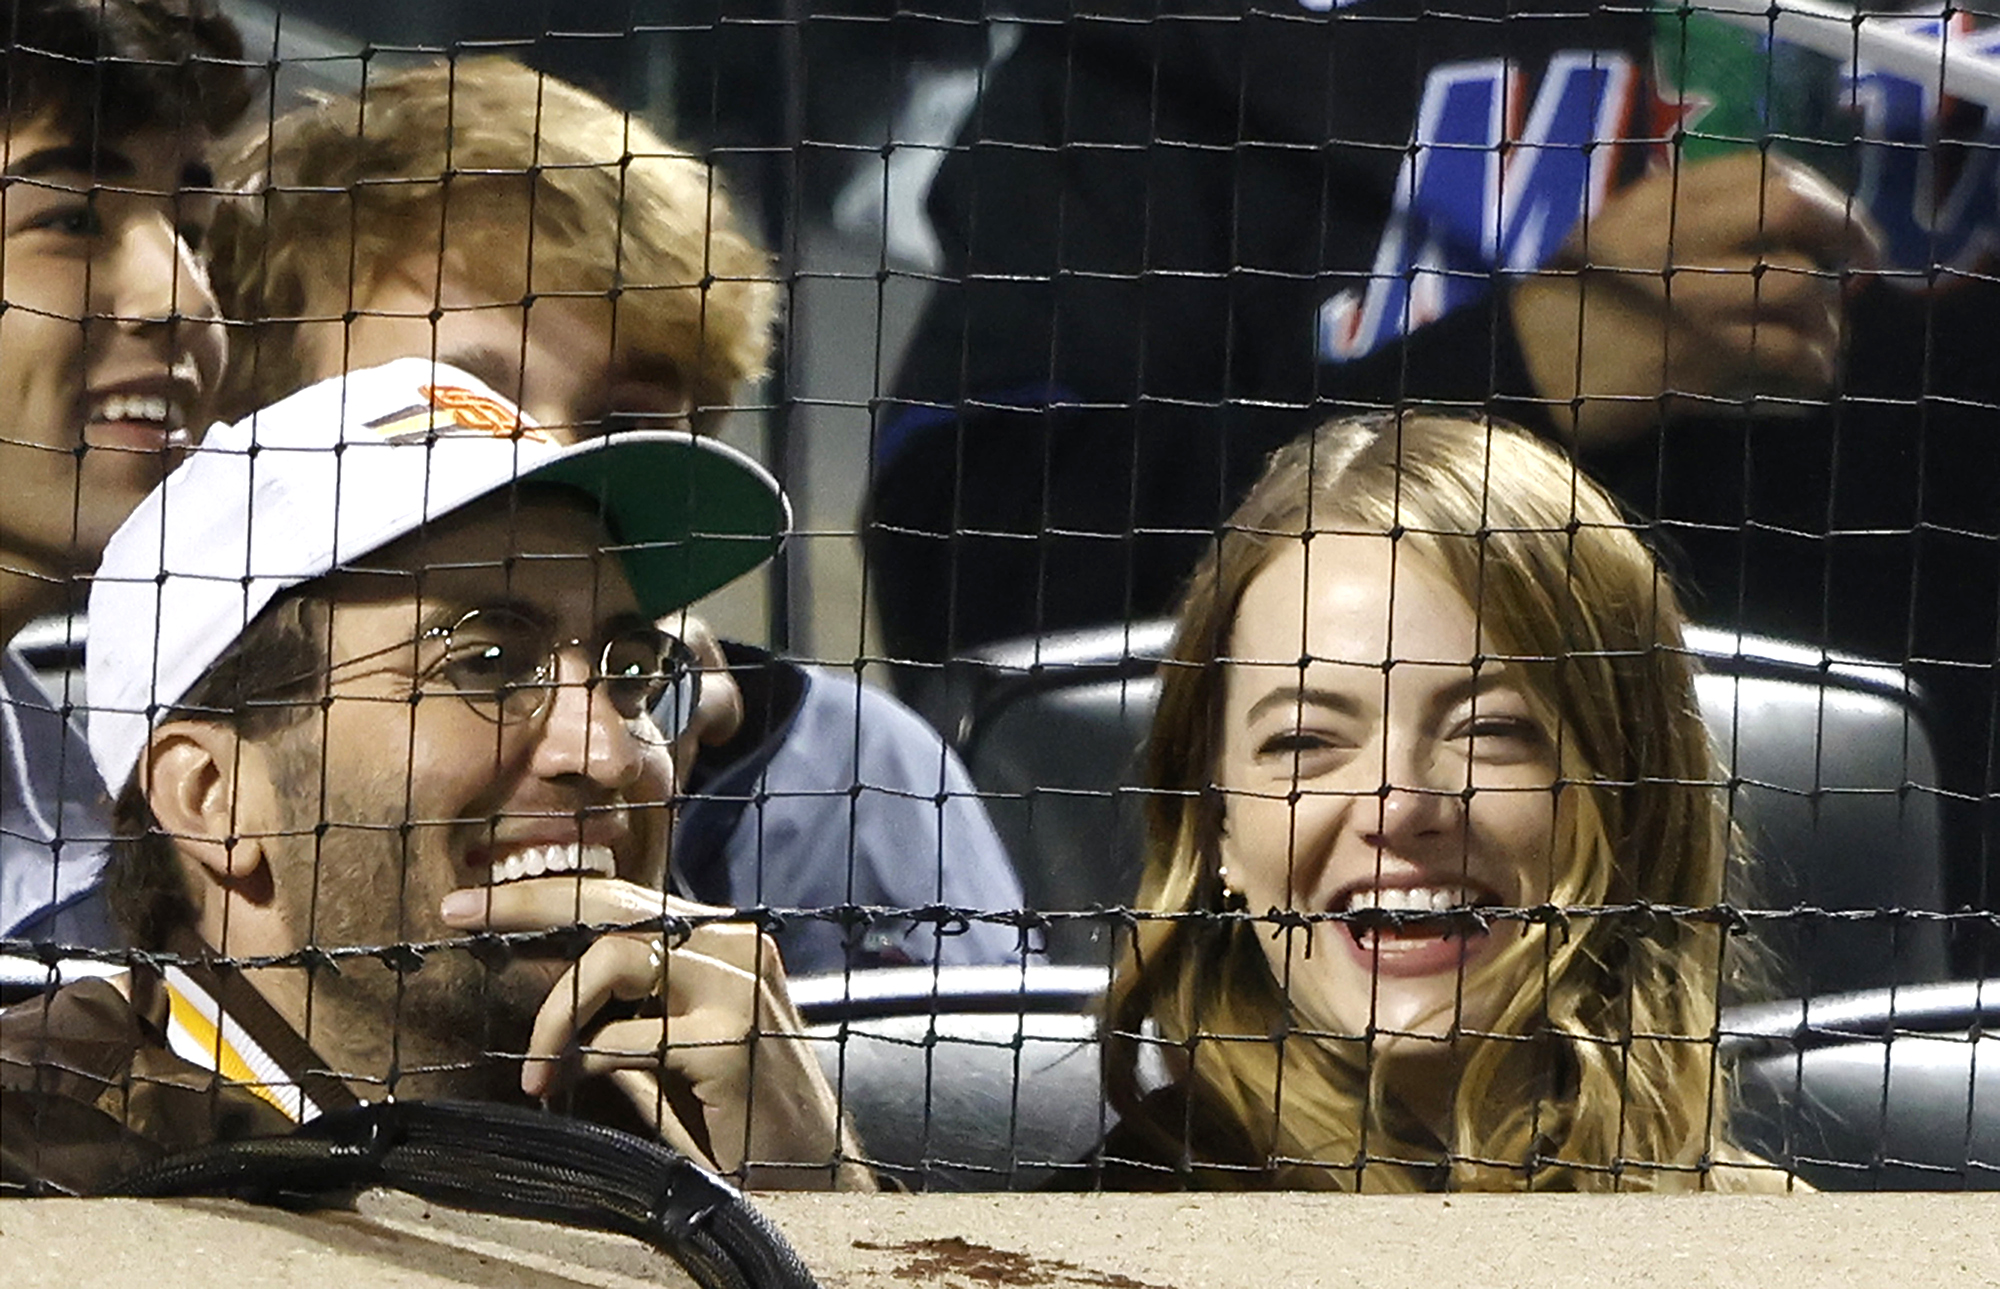 Emma Stone flaunts her love for the Padres and gets booed at Citi